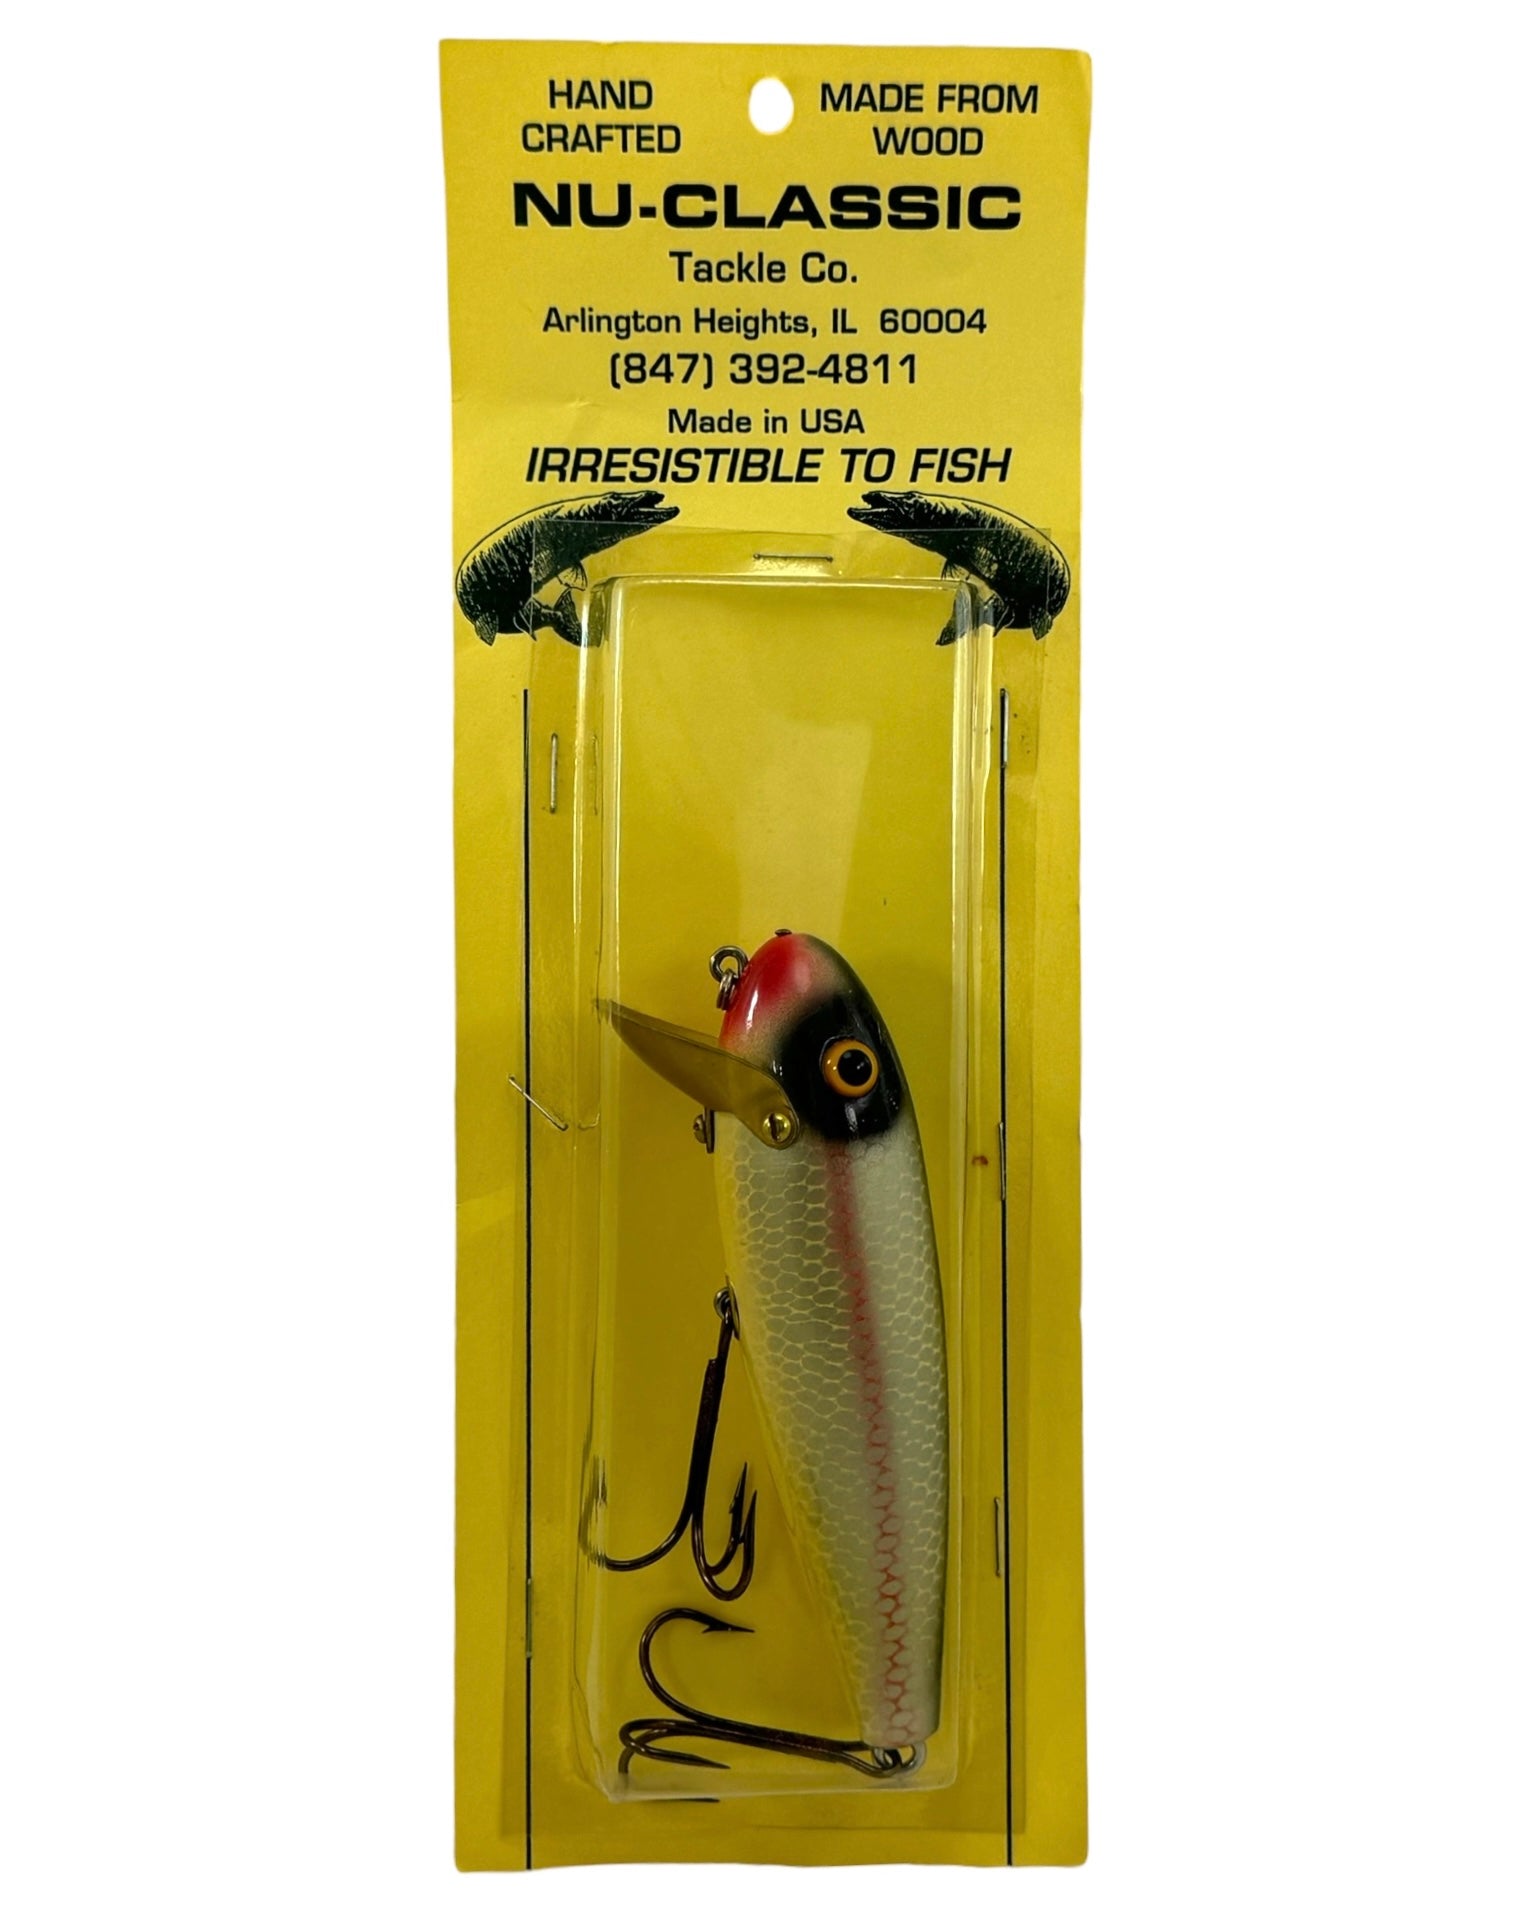 NU-CLASSIC TACKLE COMPANY Handcrafted 5 Wood Fishing Lure – Toad